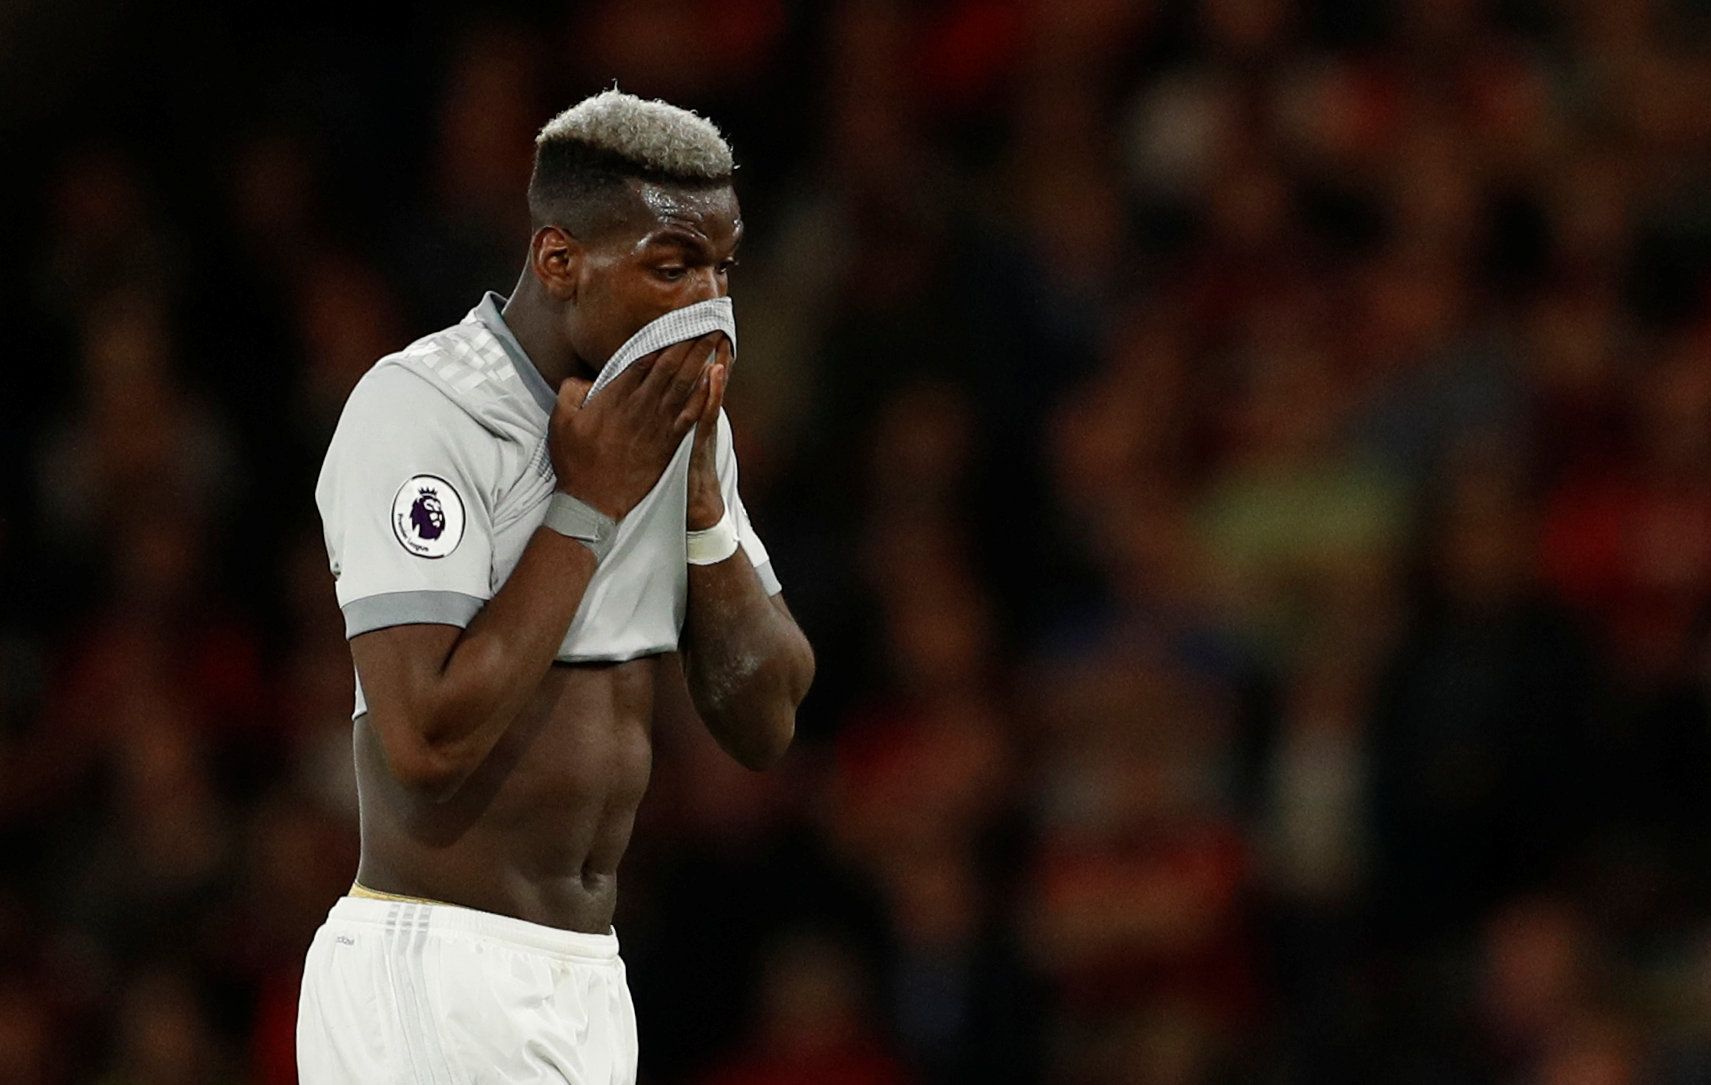 Soccer Football - Premier League - AFC Bournemouth vs Manchester United - Vitality Stadium, Bournemouth, Britain - April 18, 2018   Manchester United's Paul Pogba walks off to be substituted    Action Images via Reuters/John Sibley    EDITORIAL USE ONLY. No use with unauthorized audio, video, data, fixture lists, club/league logos or 